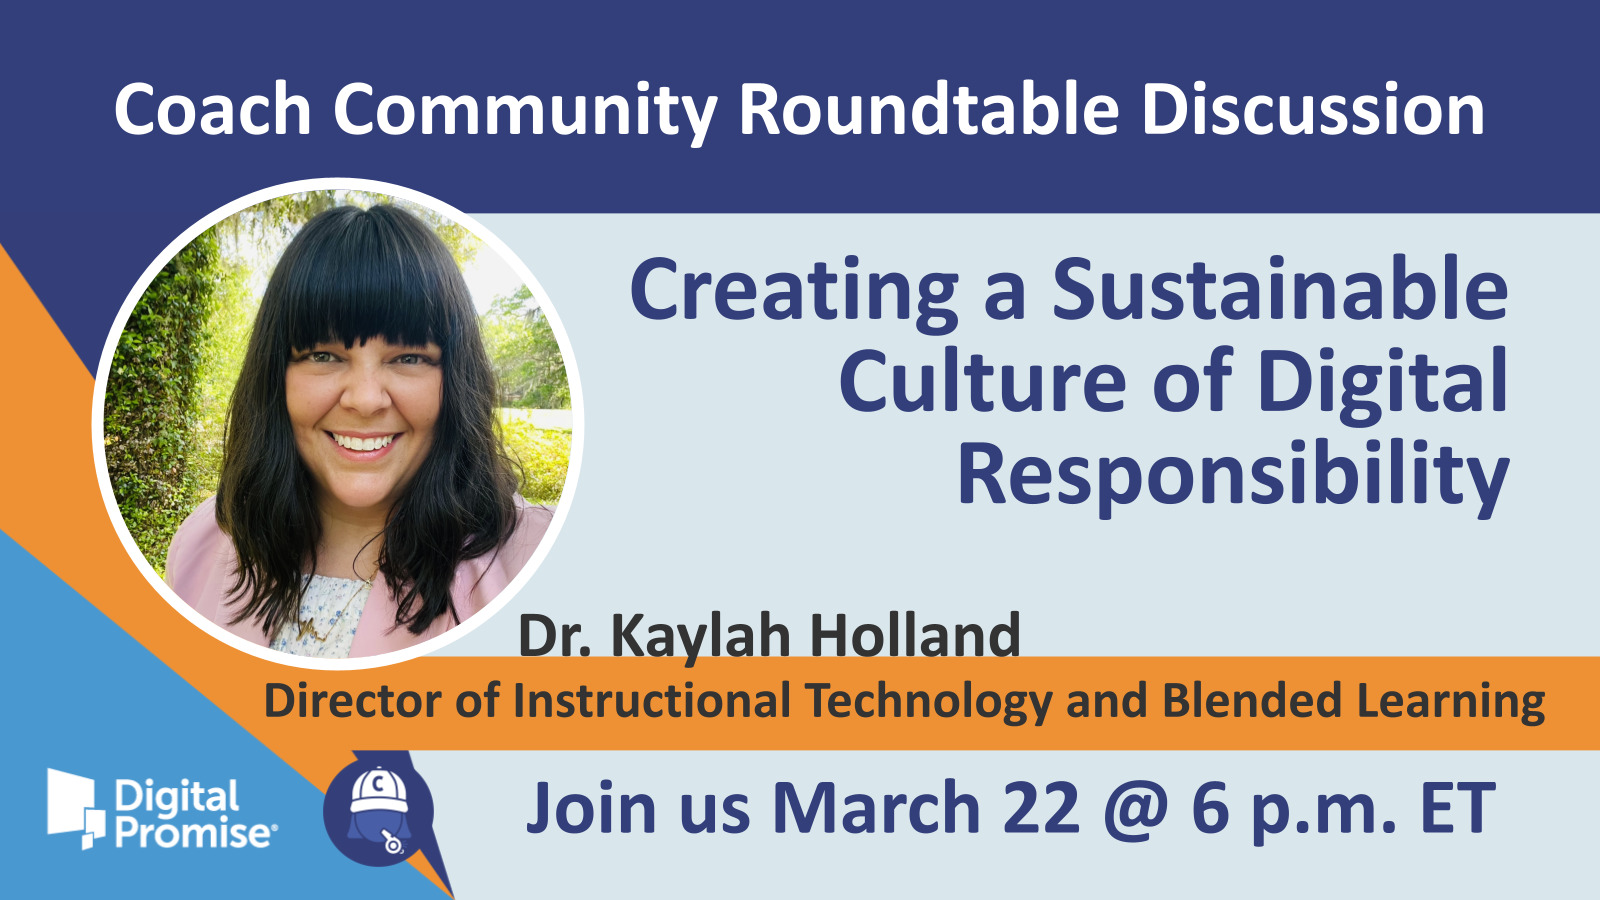 Creating a Sustainable Culture of Digital Responsibility on March 22 at 6 p.m. ET